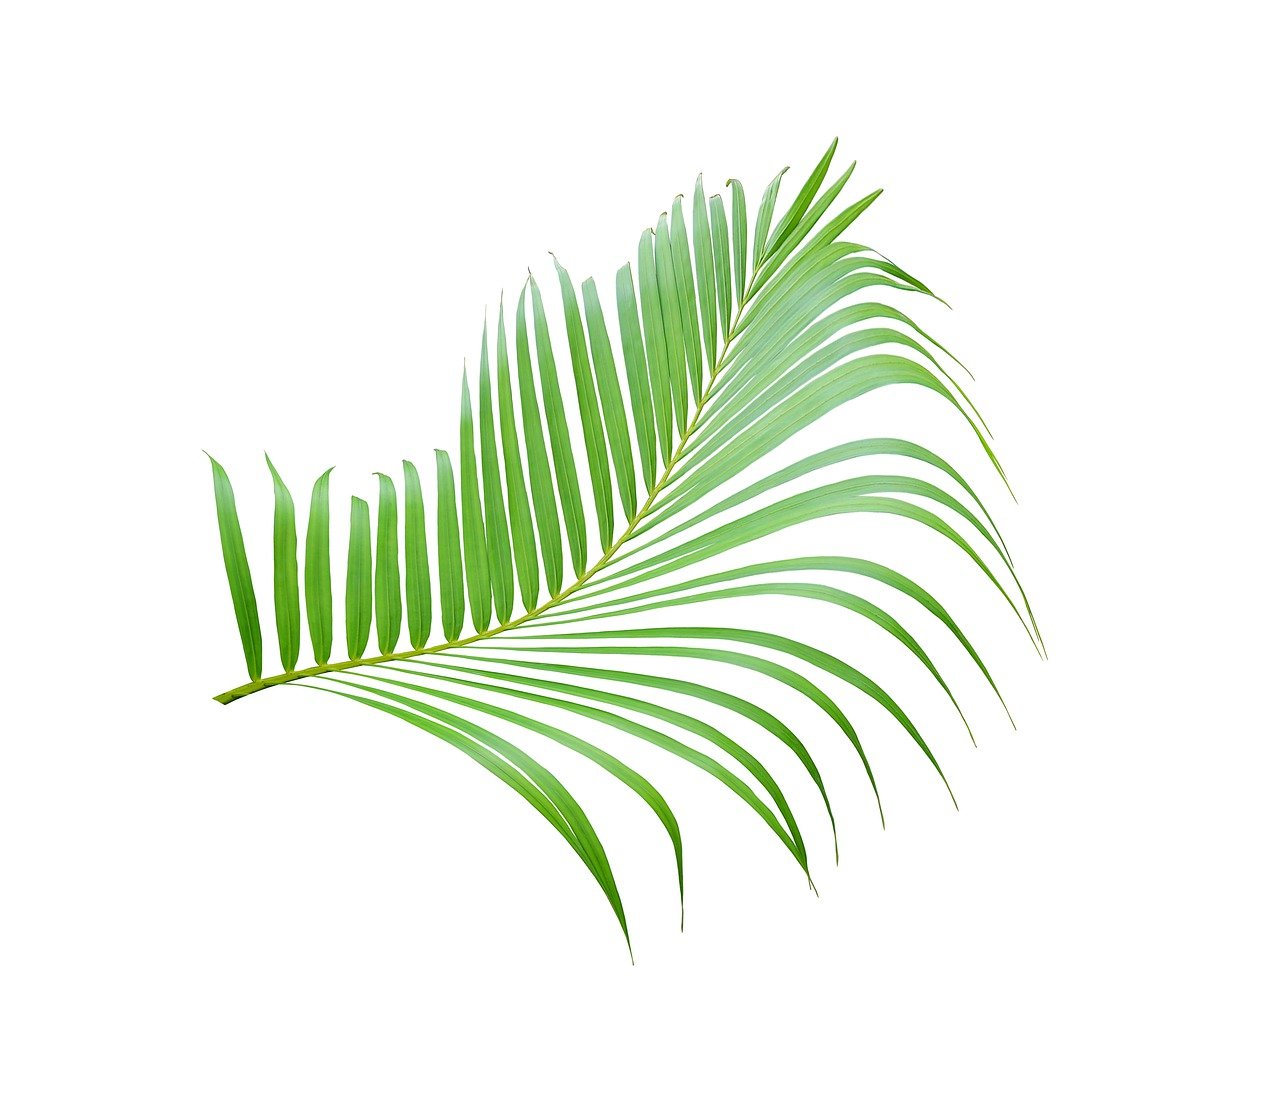 a close up of a palm leaf on a white background, an illustration of, by Maeda Masao, shutterstock, flame ferns, above side view, isolated on white background, top angle view